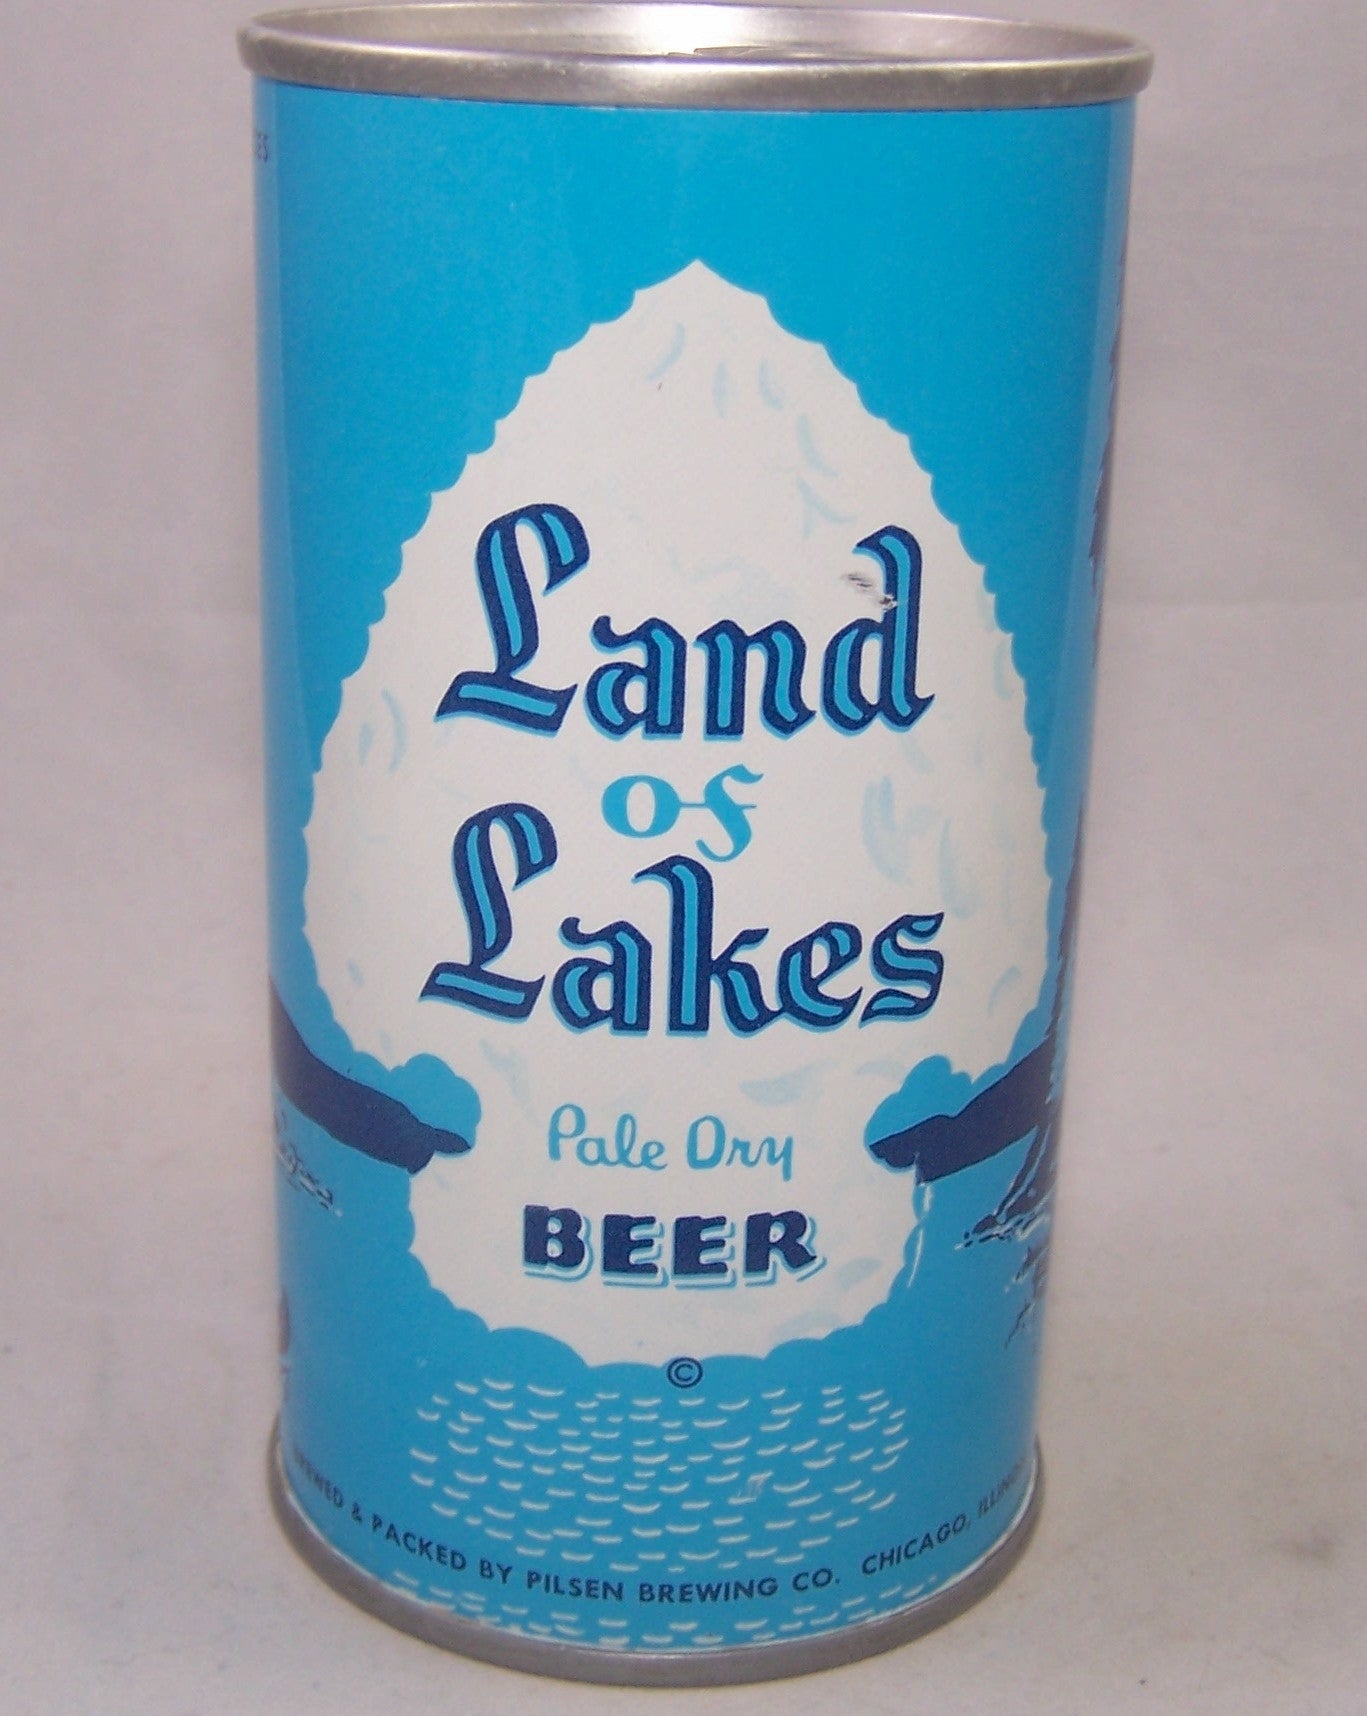 Land of Lakes Pale Dry Beer, USBC II 87-06, Grade 1+ Sold on 03/19/17